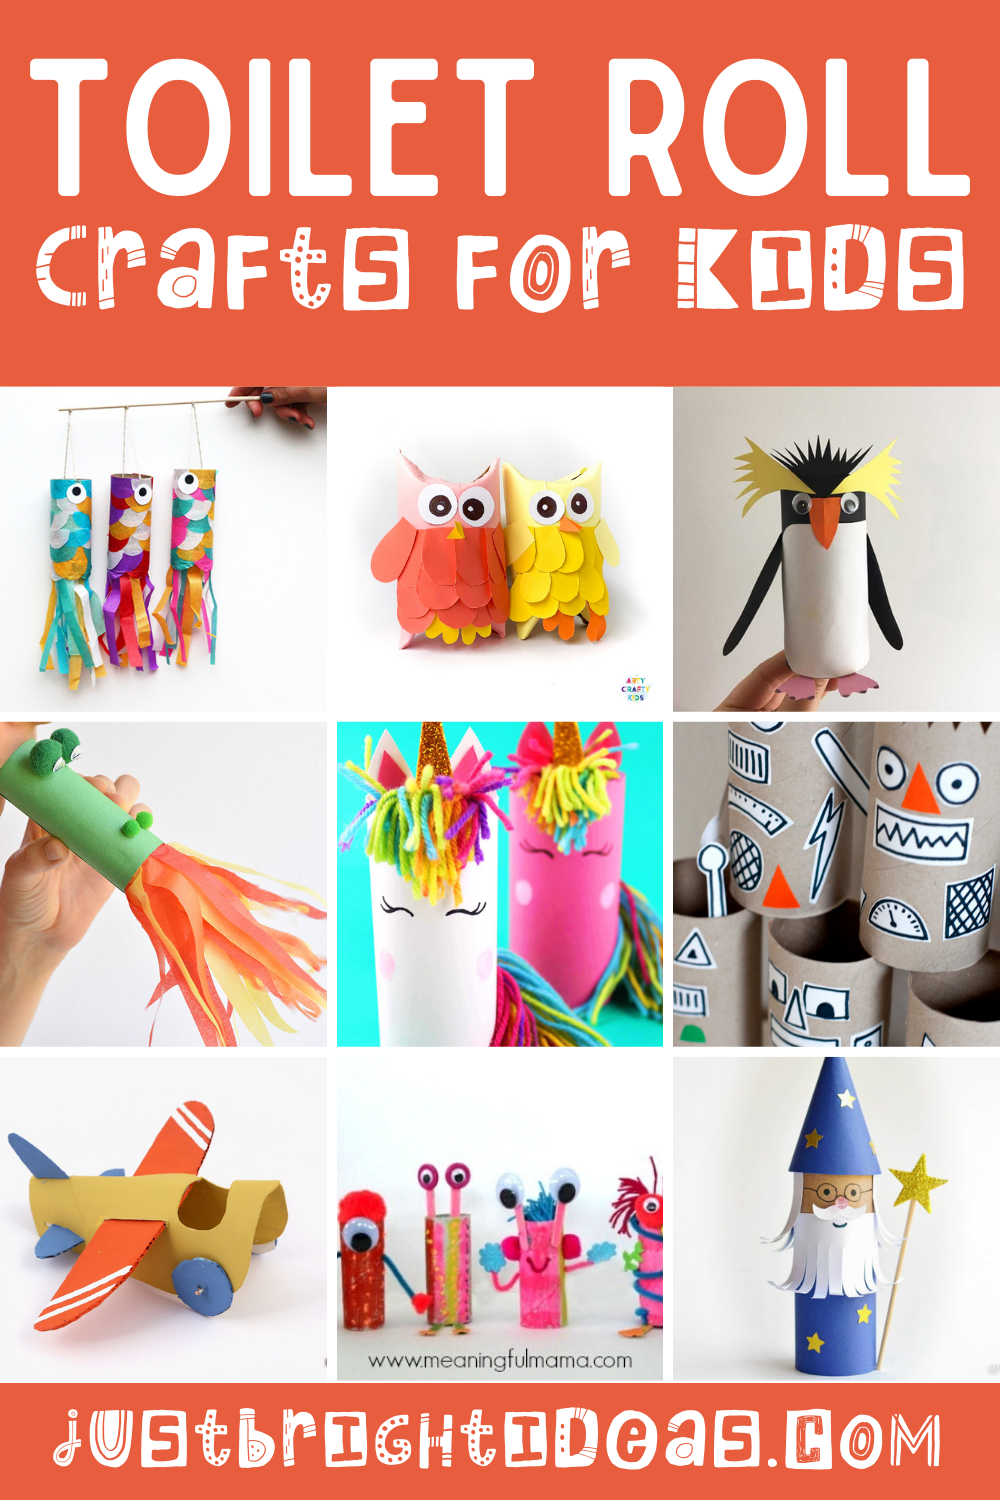 Loving these easy toilet roll crafts for kids of all ages! So many fun ideas from dragons and unicorns to castles and adorable rockhopper penguins!